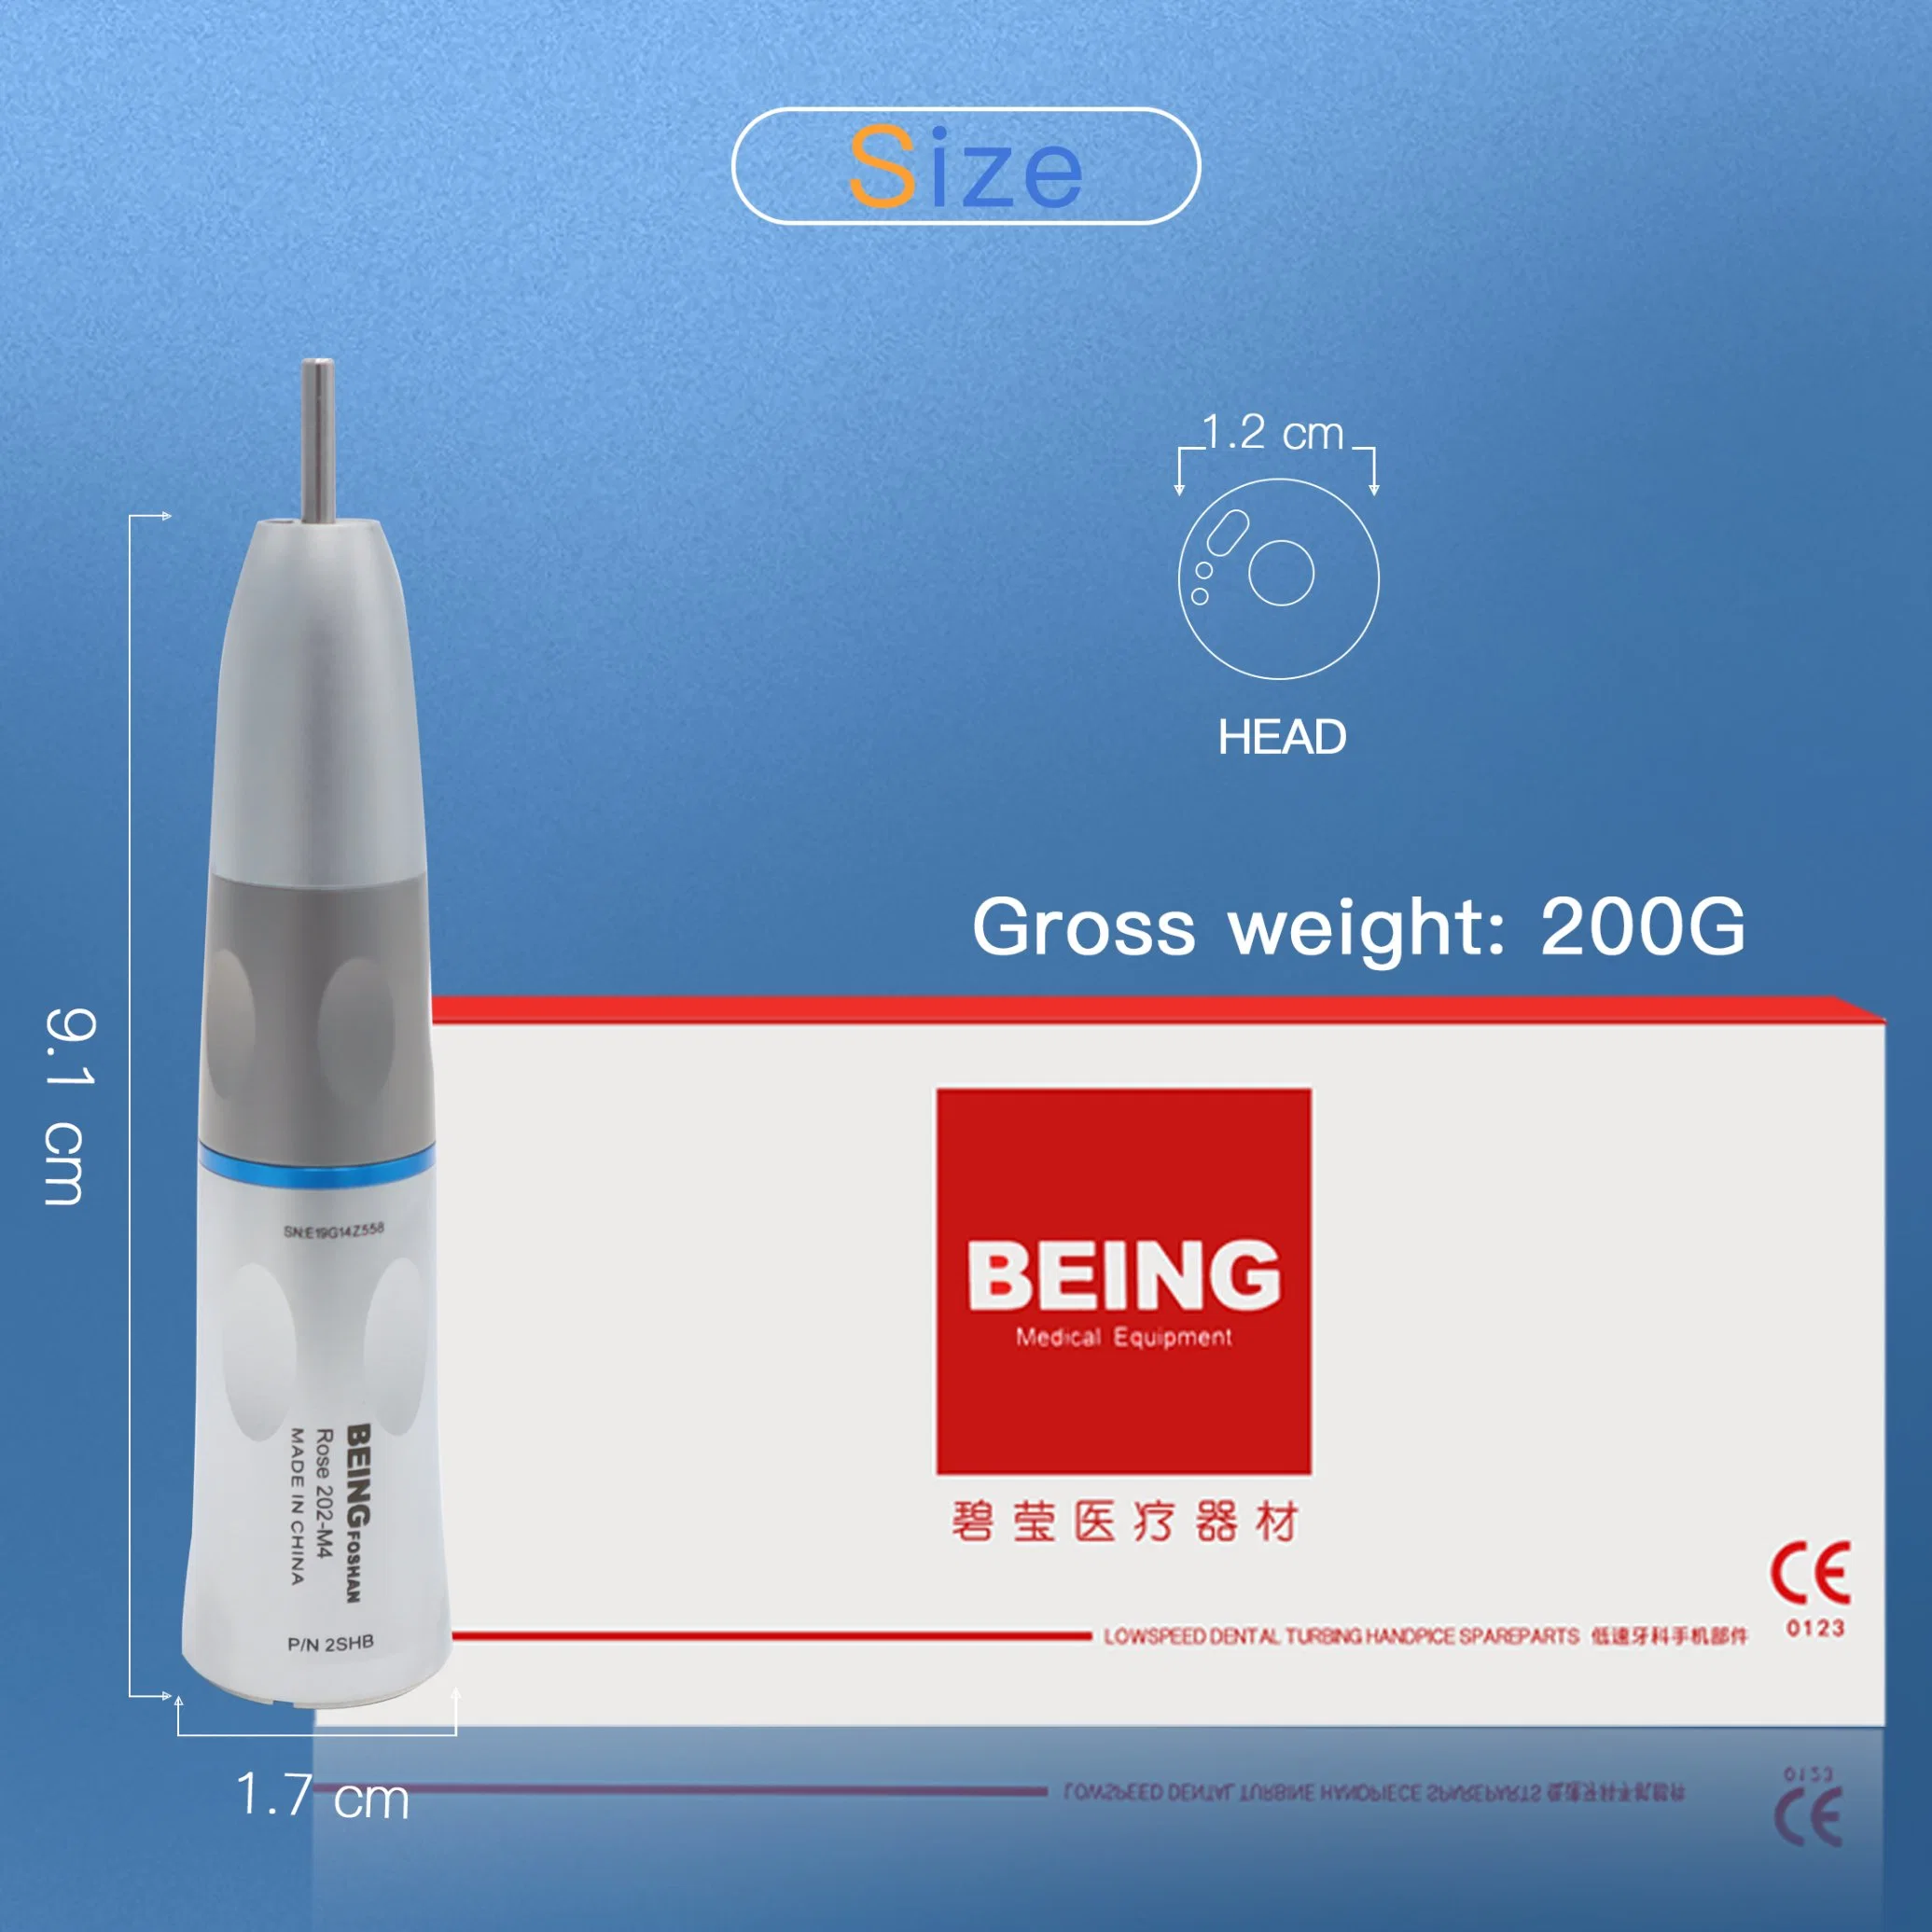 China Foshan Best Seller Professional Being Dental Handpiece Lab Clinic/Hospital Used LED 1: 1 Low Speed Dental Straight Handpiece with Fiber Optic